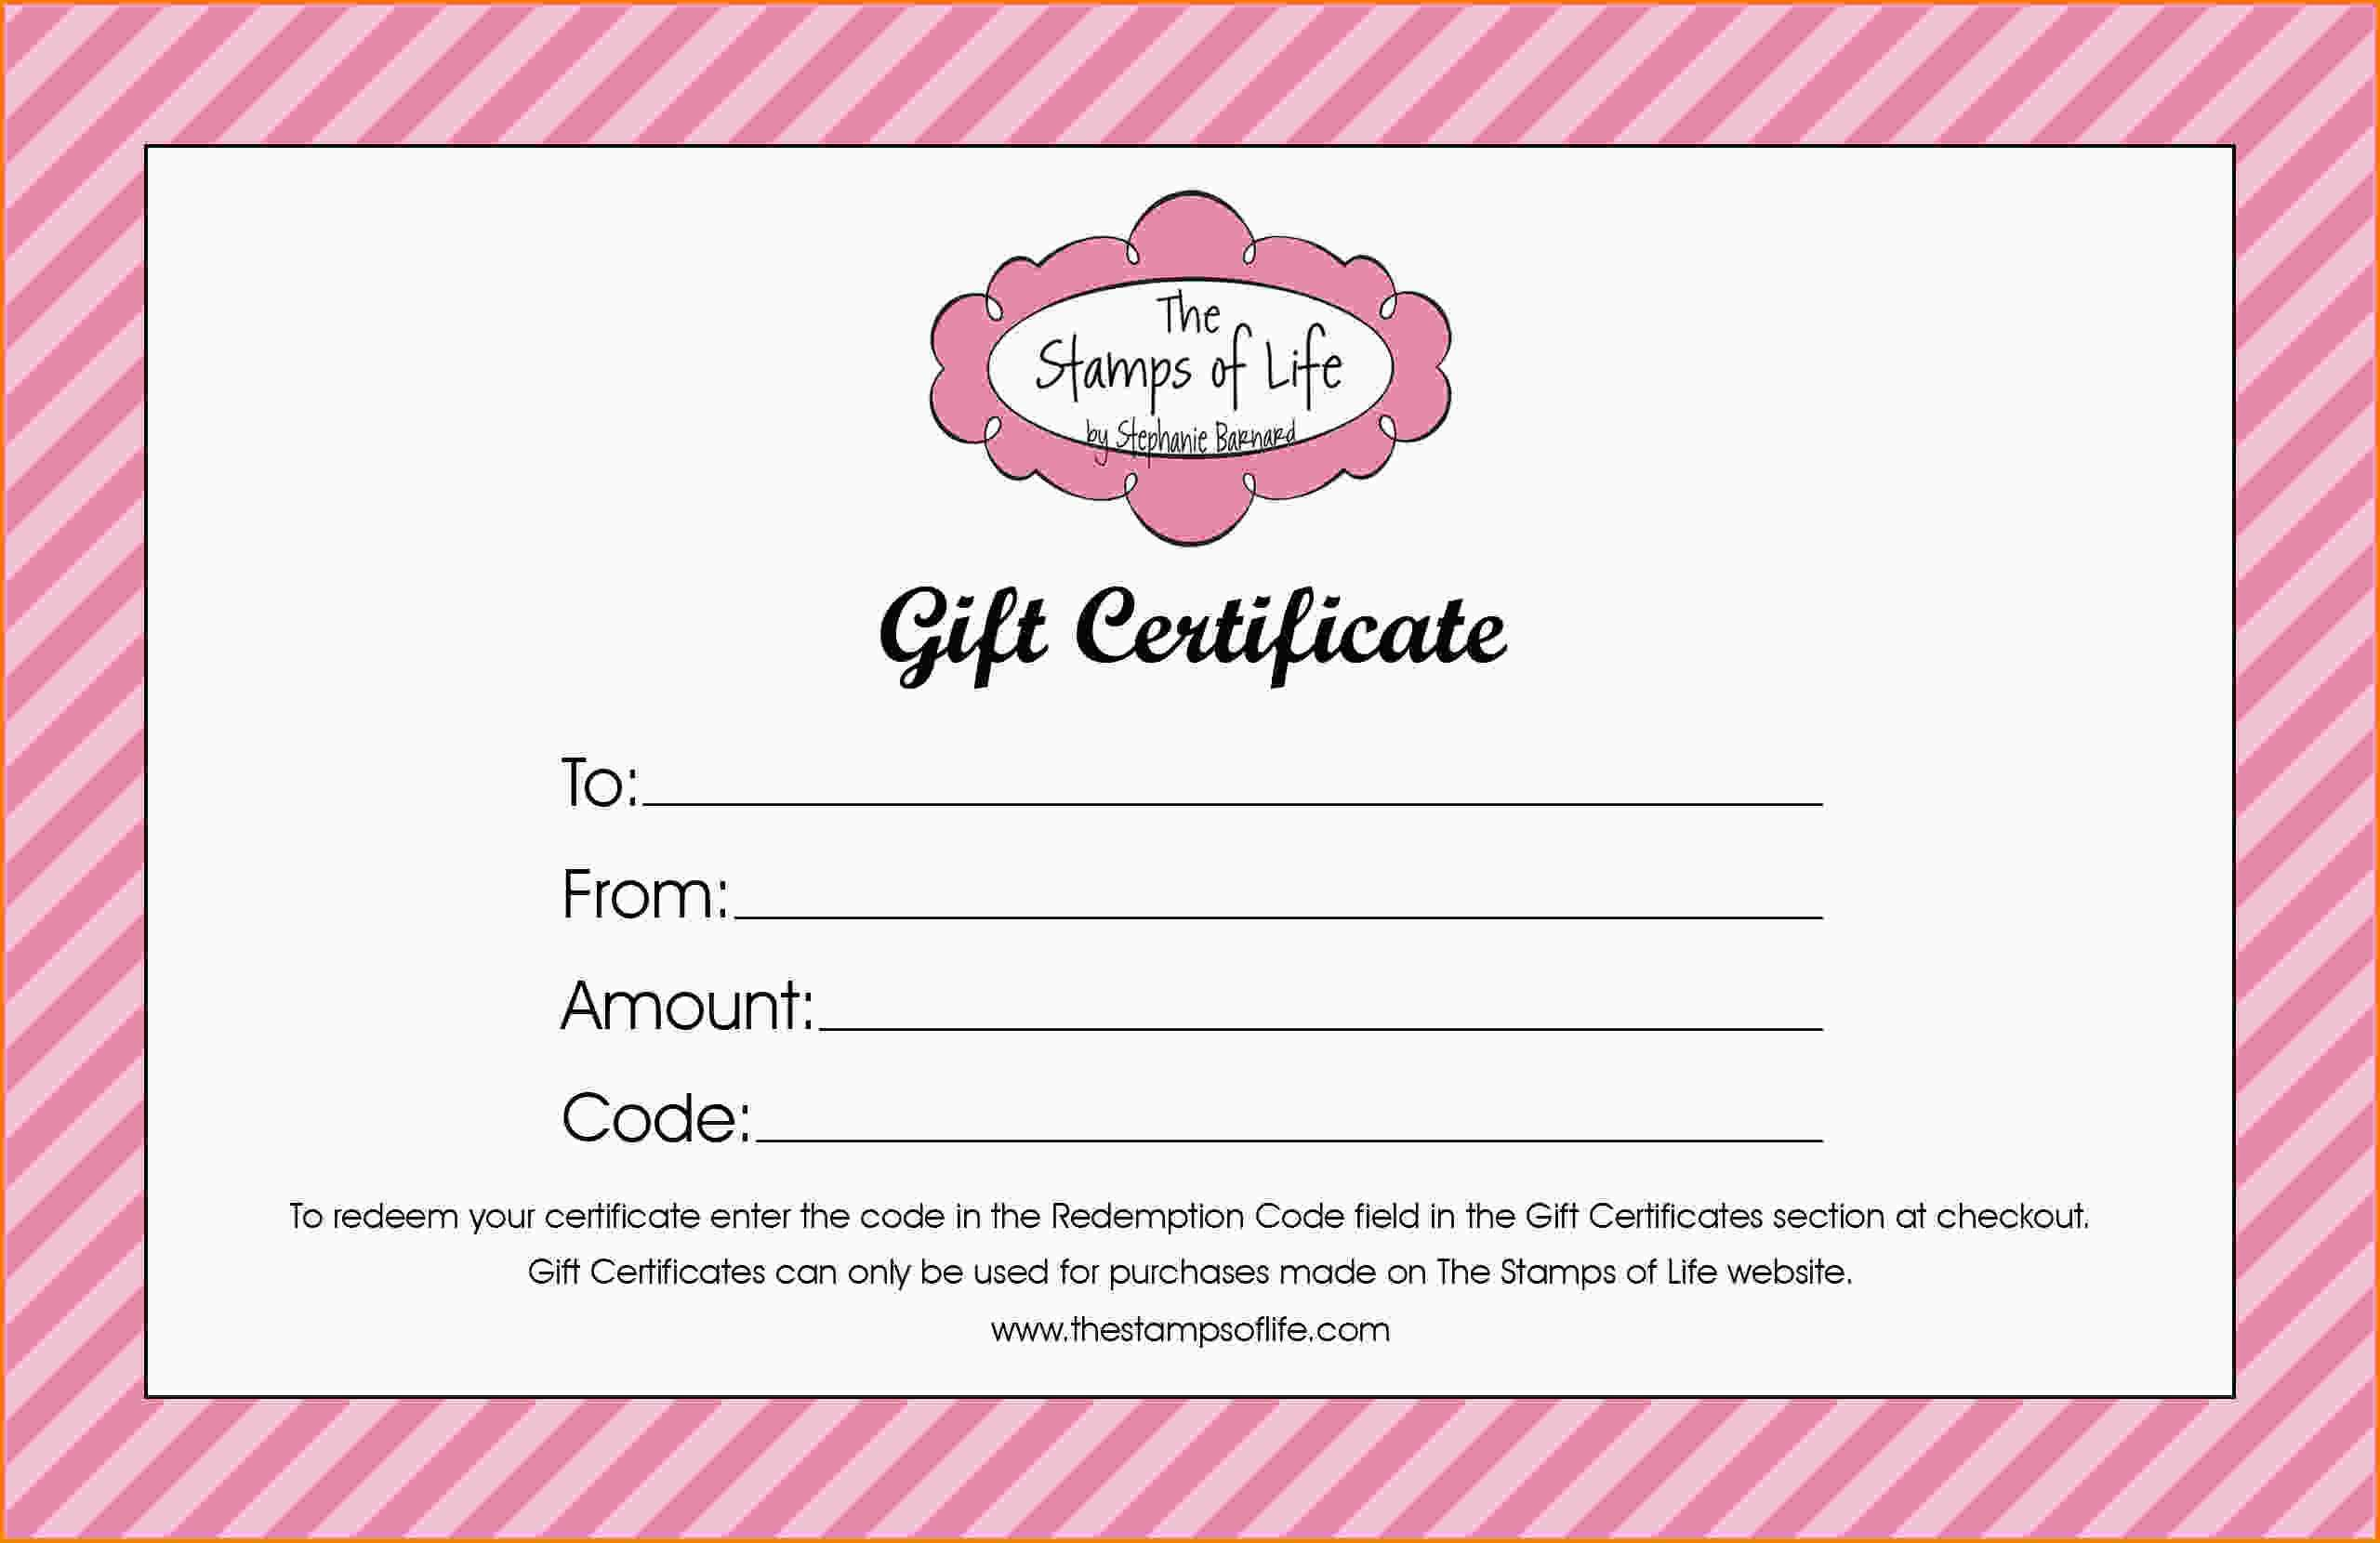 Print Gift Vouchers Online Free - Colona.rsd7 For Nail Gift Certificate Template Free